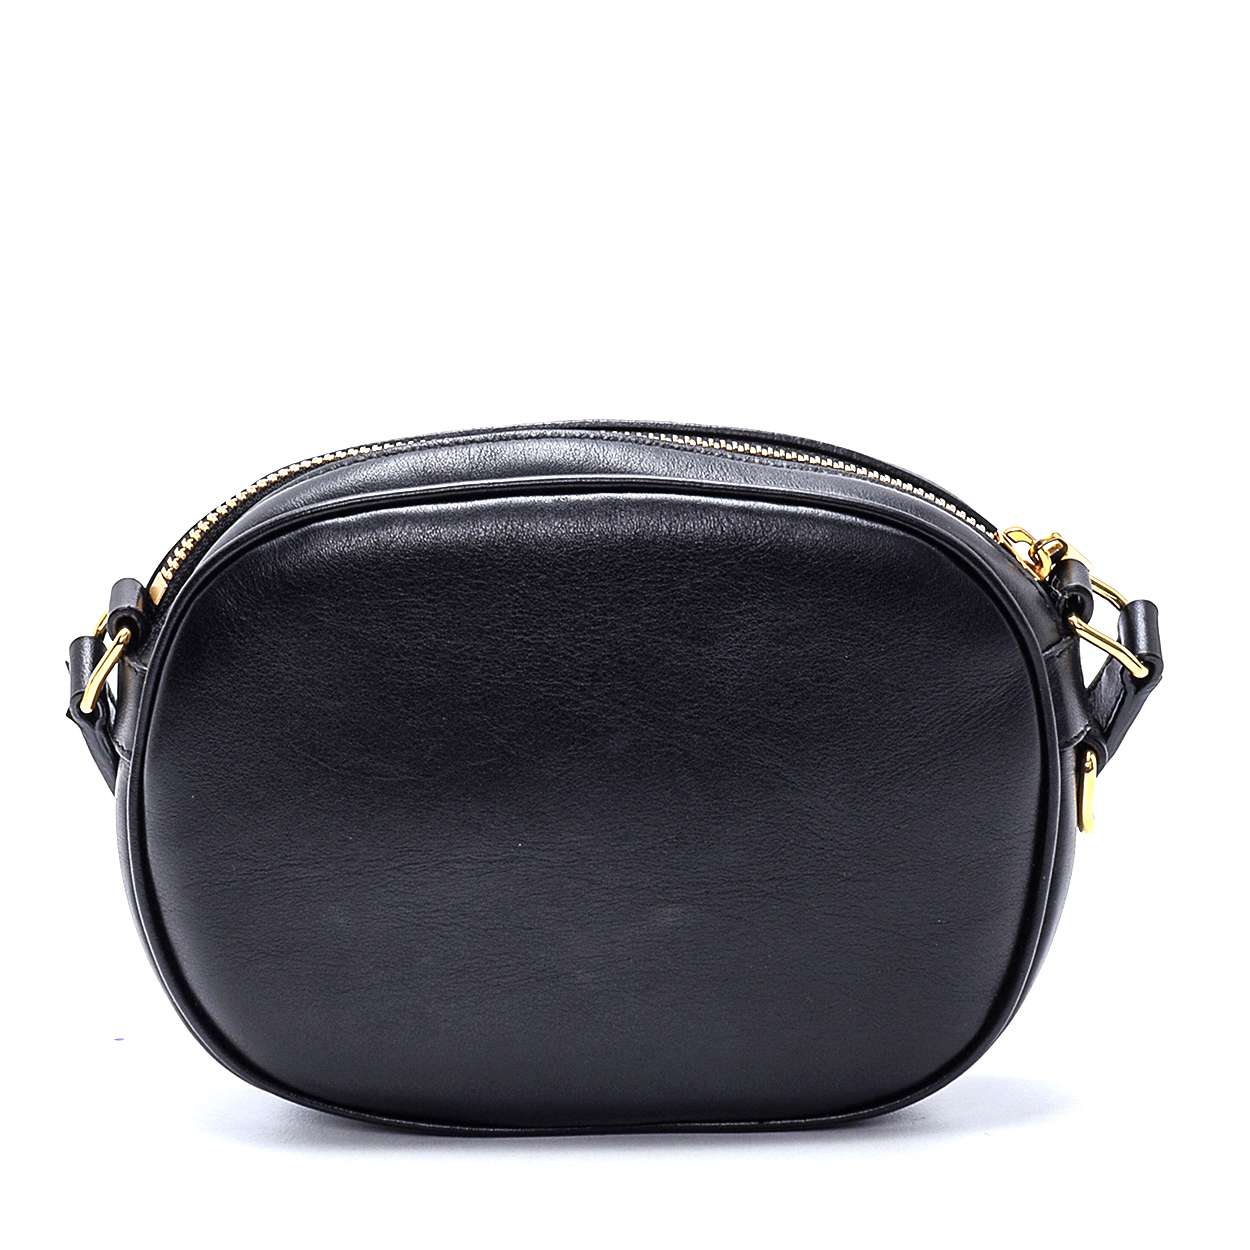 Celine - Black Calfskin Leather Quilted  Small C Charm Crossbody Bag